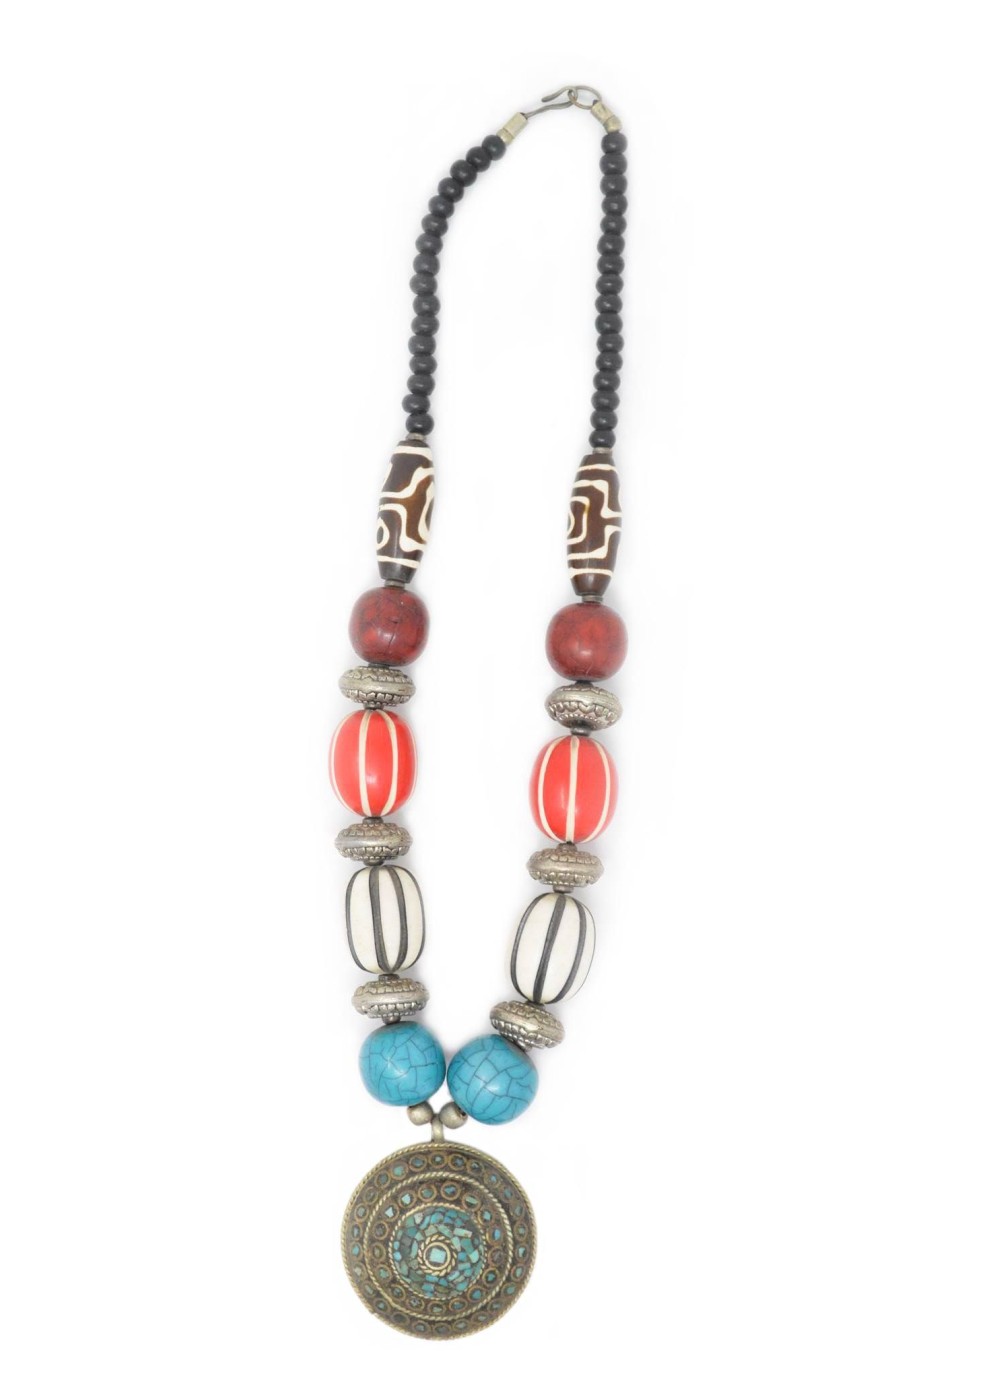 Tibetan Necklace With Multicolored Turquoise Pendant